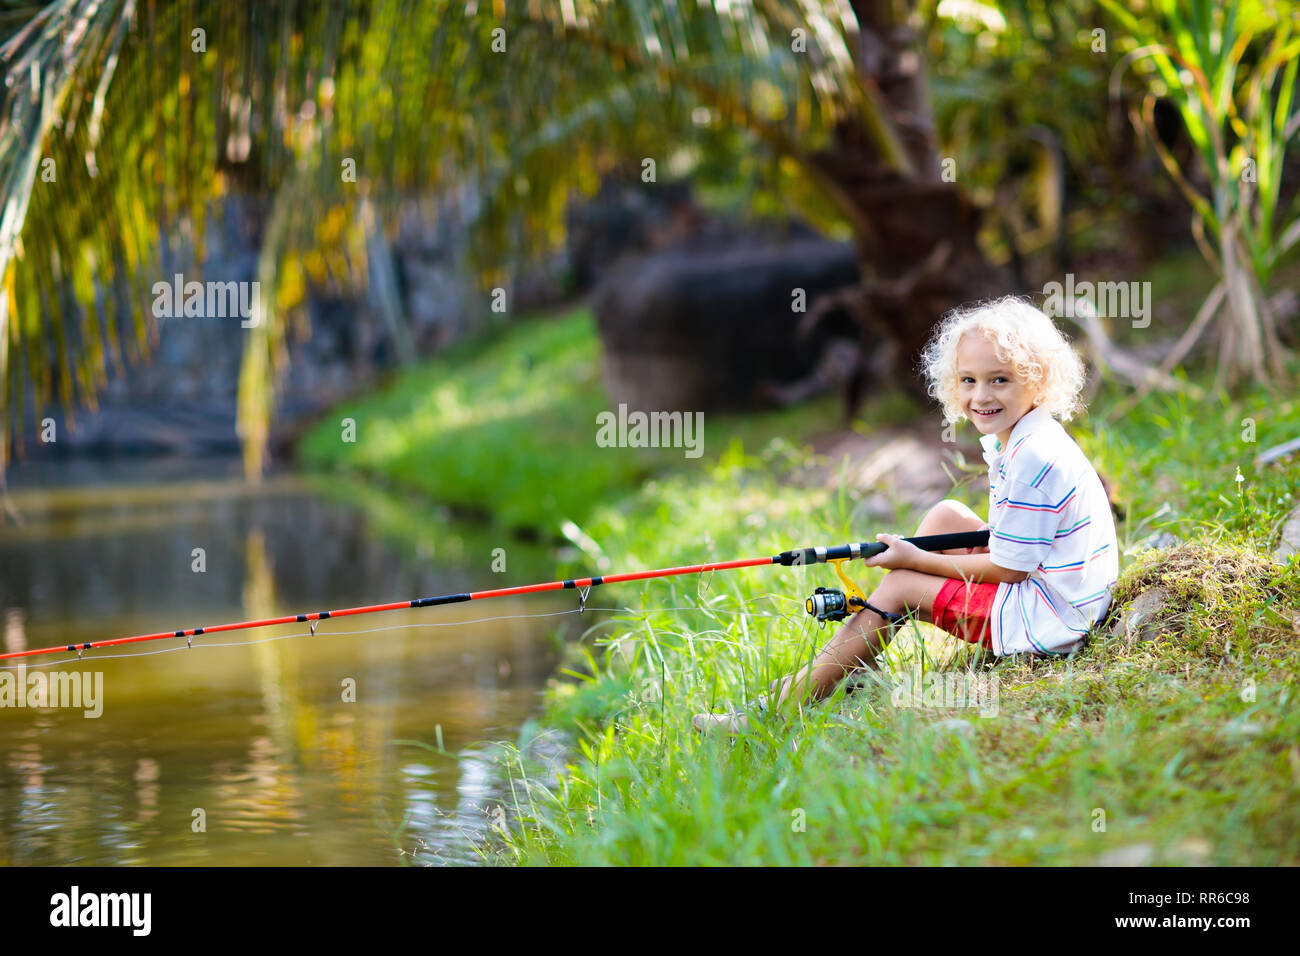 Boy fishing. Child with red rod catching fish in river on sunny